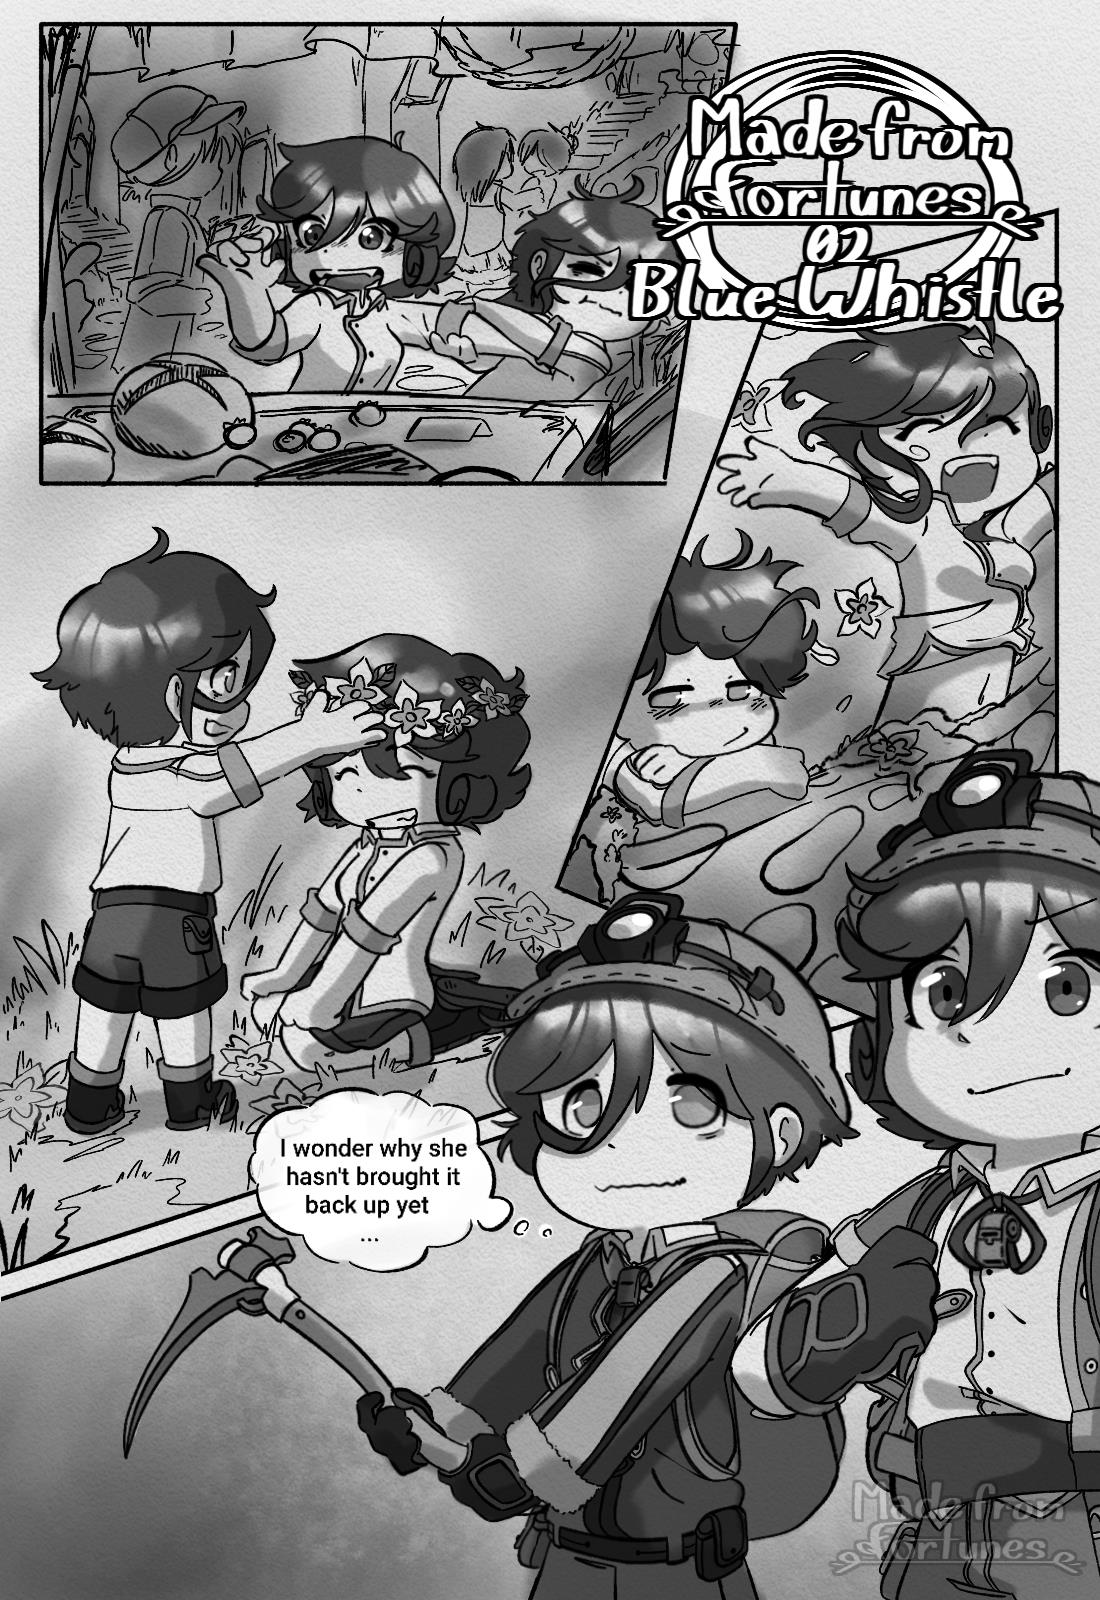 Made From Fortunes (Made In Abyss Fanmade Comic) - Page 1